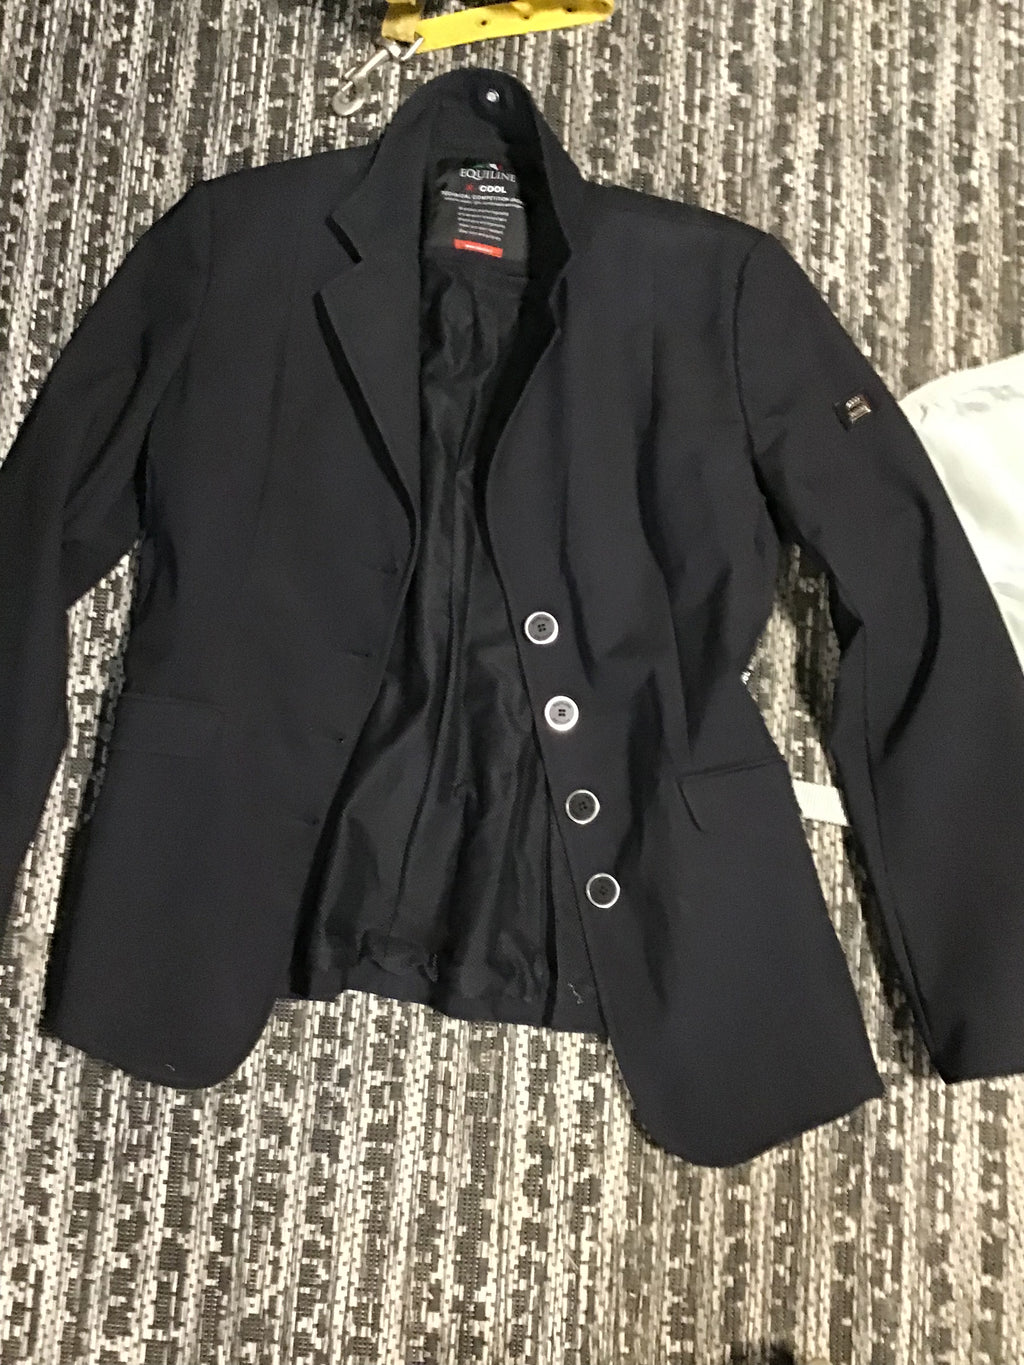 EquiLine X-cool show jacket